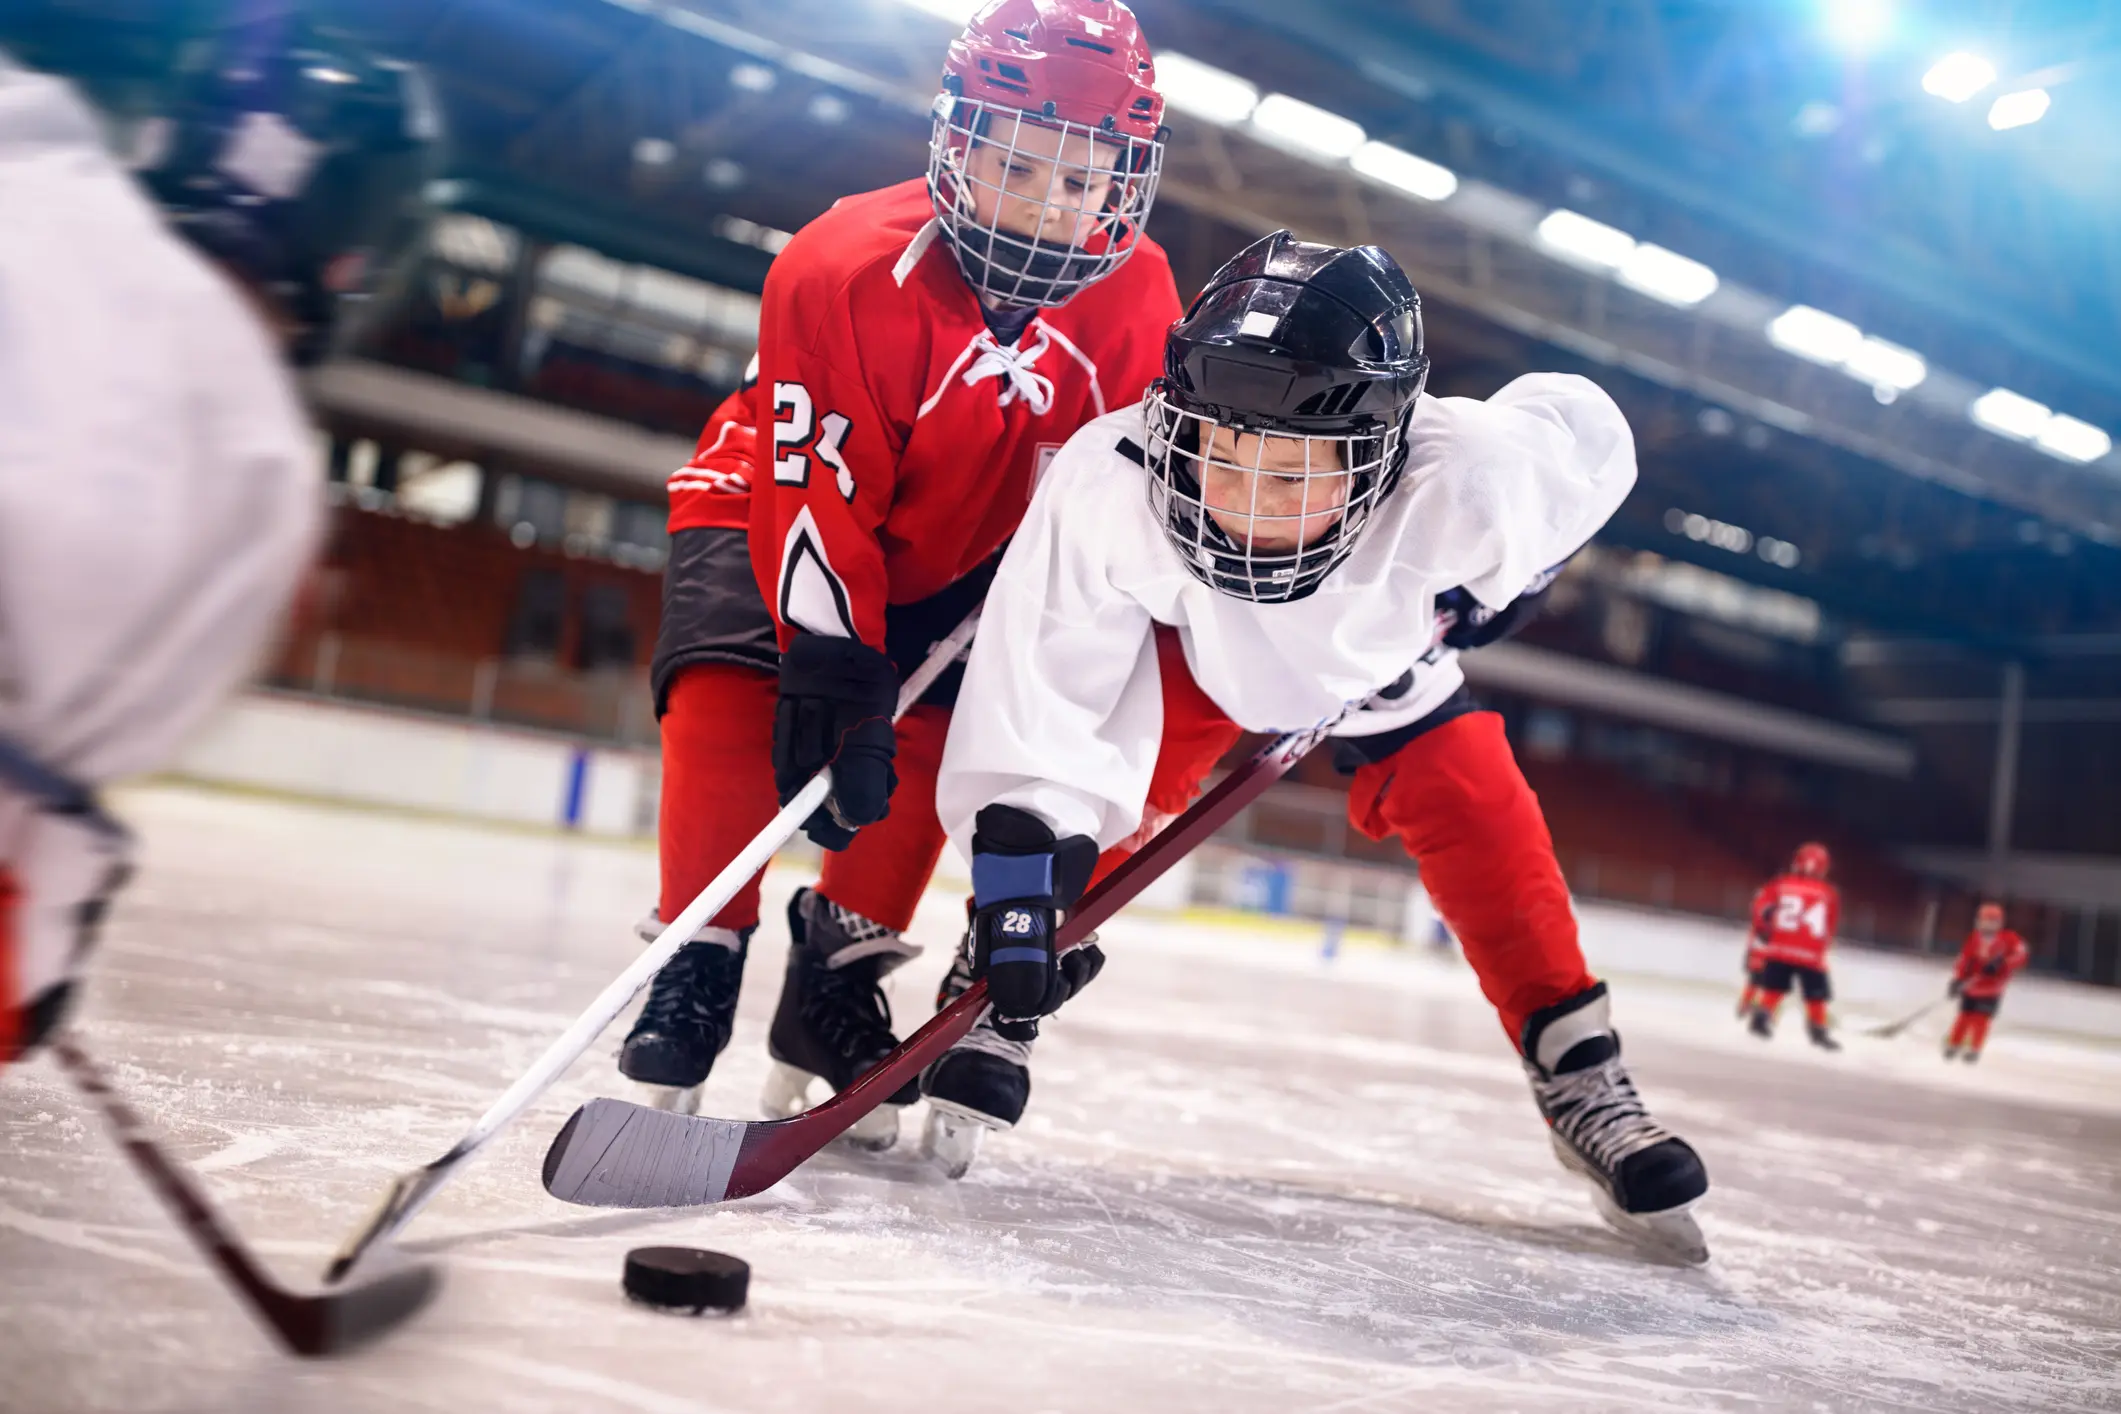 Featured image: Q&A: Hacking Growth for Your Hockey Organization with Jim Dahline, Director of Youth Development at MN Blades